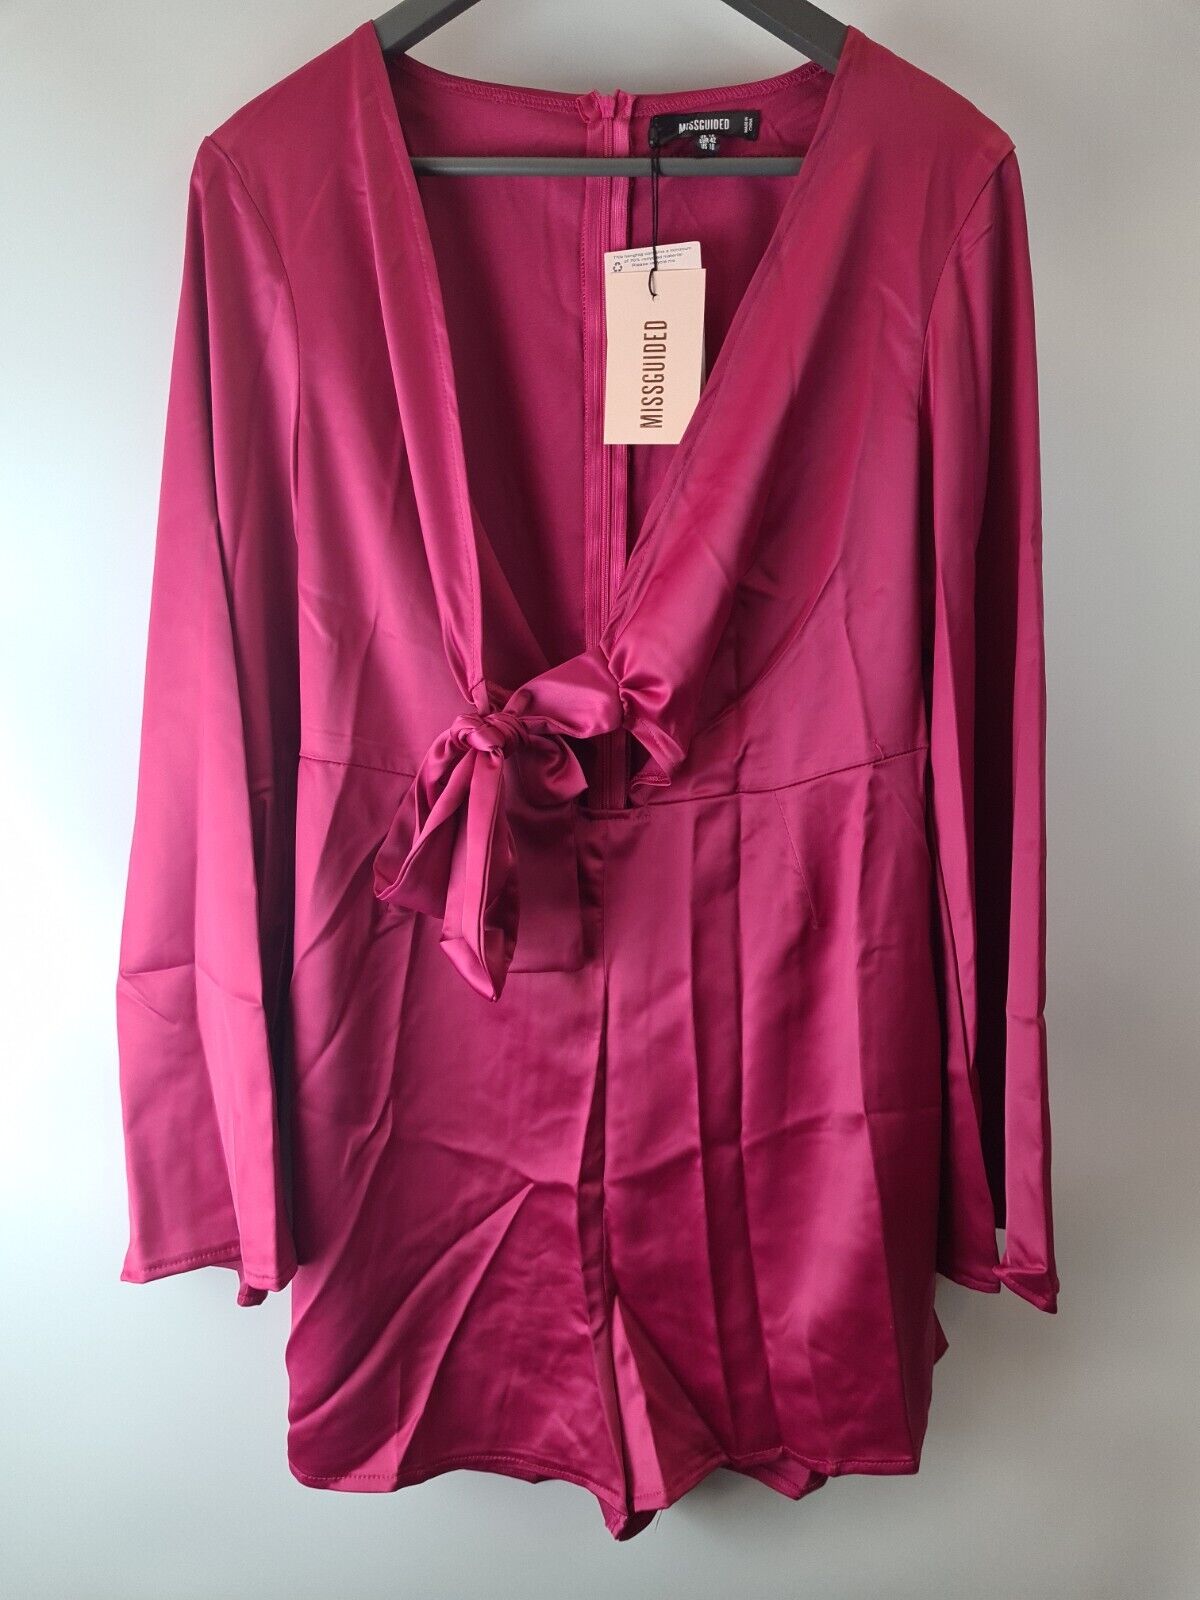 Missguided Satin Tie Front Flare Sleeves Hot Pink Playsuit Size 14.